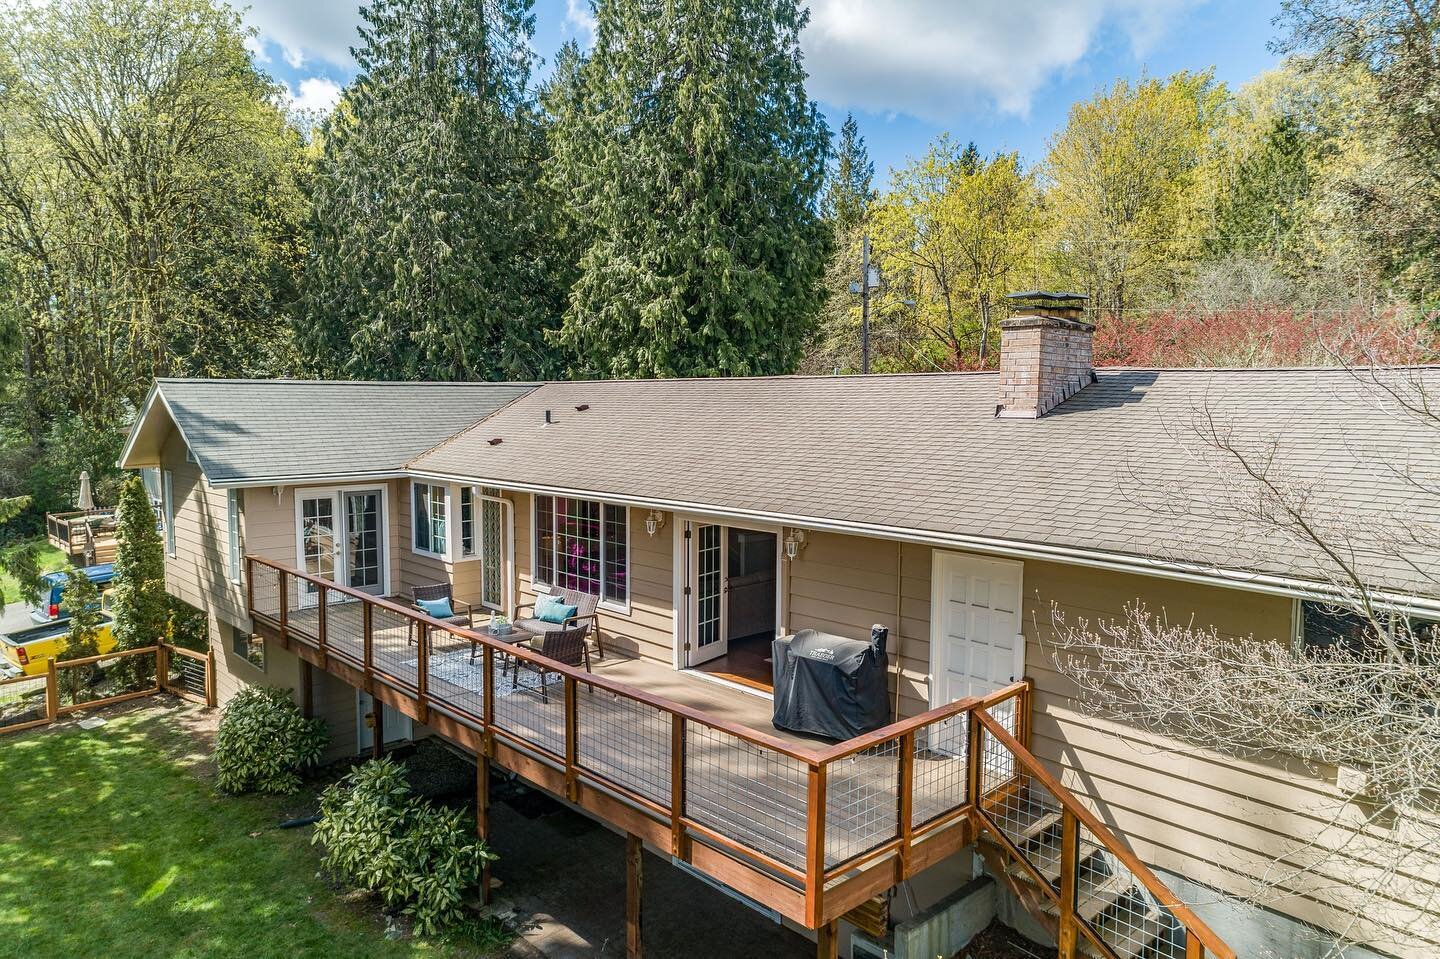 New Listing! 
11510 Brownsville Highway NE, Poulsbo, WA 98370 
4 Beds &bull; 3 Baths &bull; 2907sqft
MLS # 1918343 
___________________________
Peek-a-boo Sound views &amp; finished daylight basement with private patio entrance &amp; kitchenette. Ope